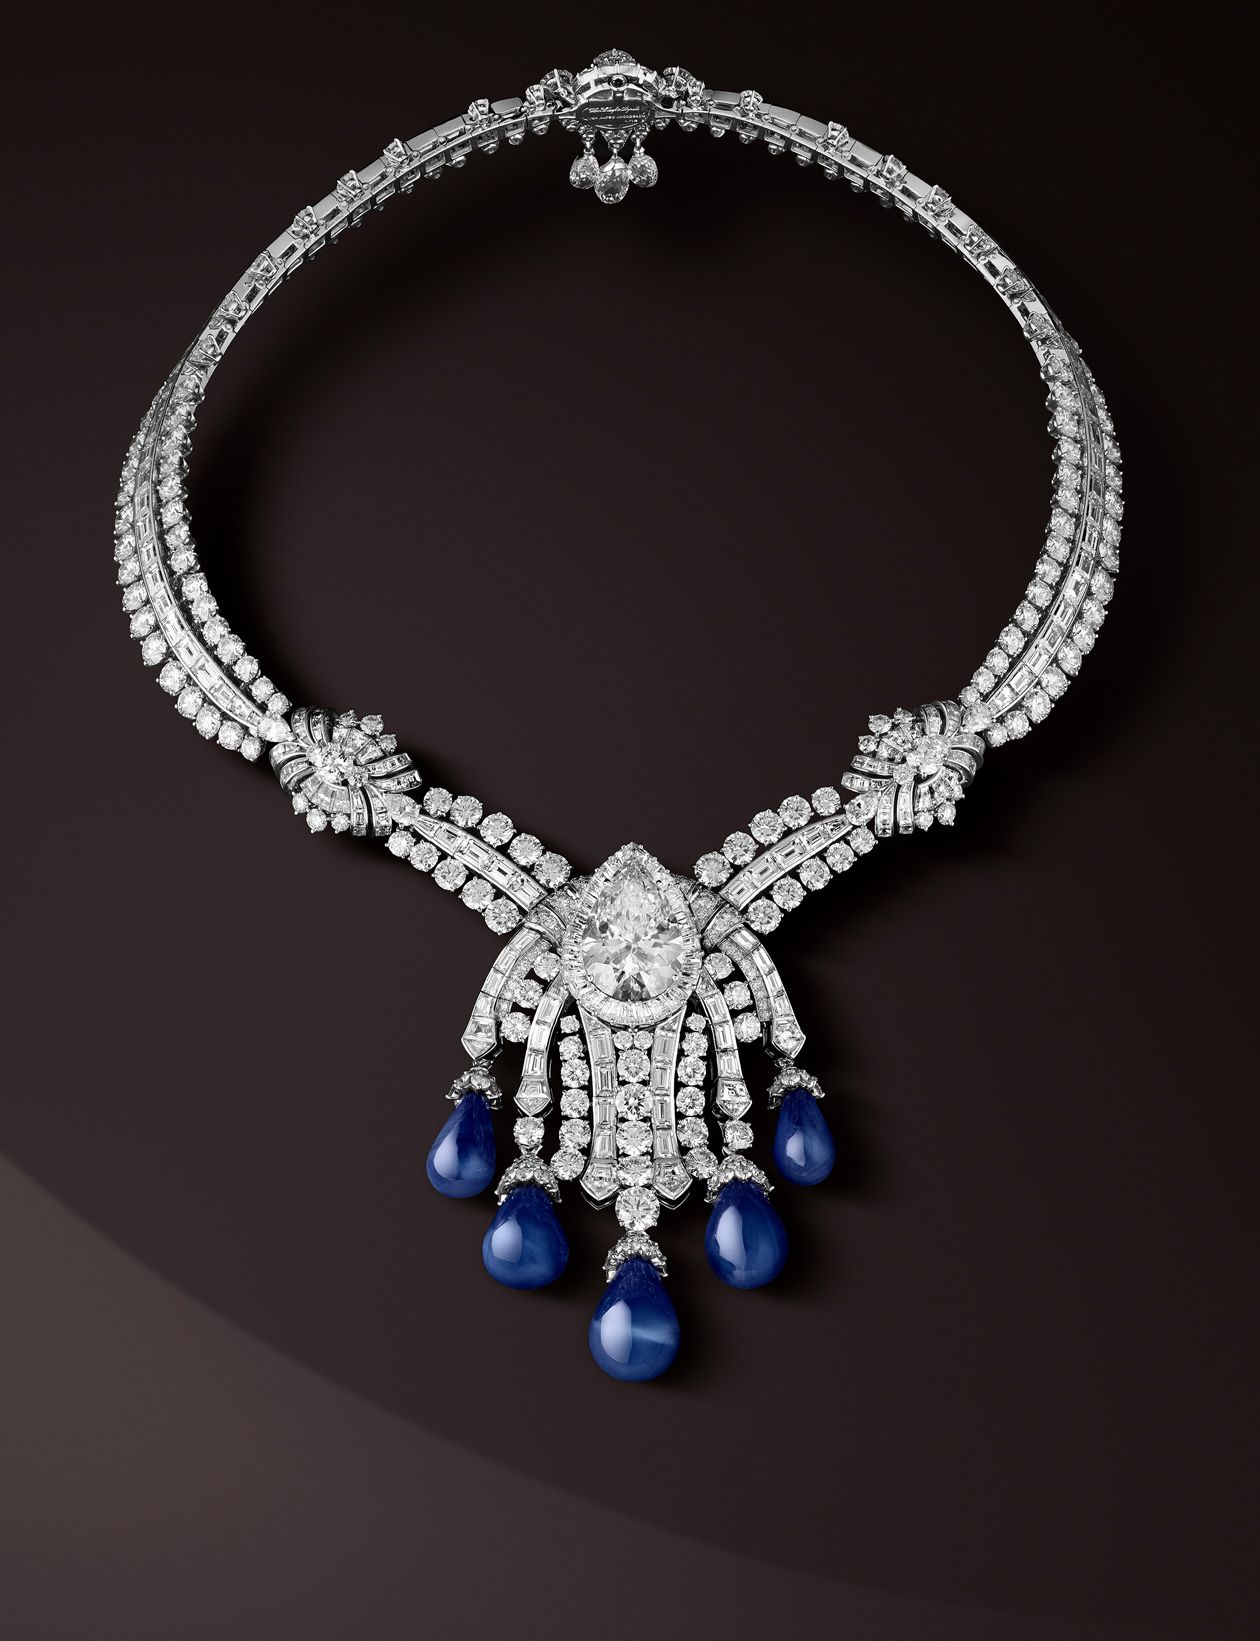 Philippe LACOMBE - Photographer | VAN CLEEF AND ARPELS